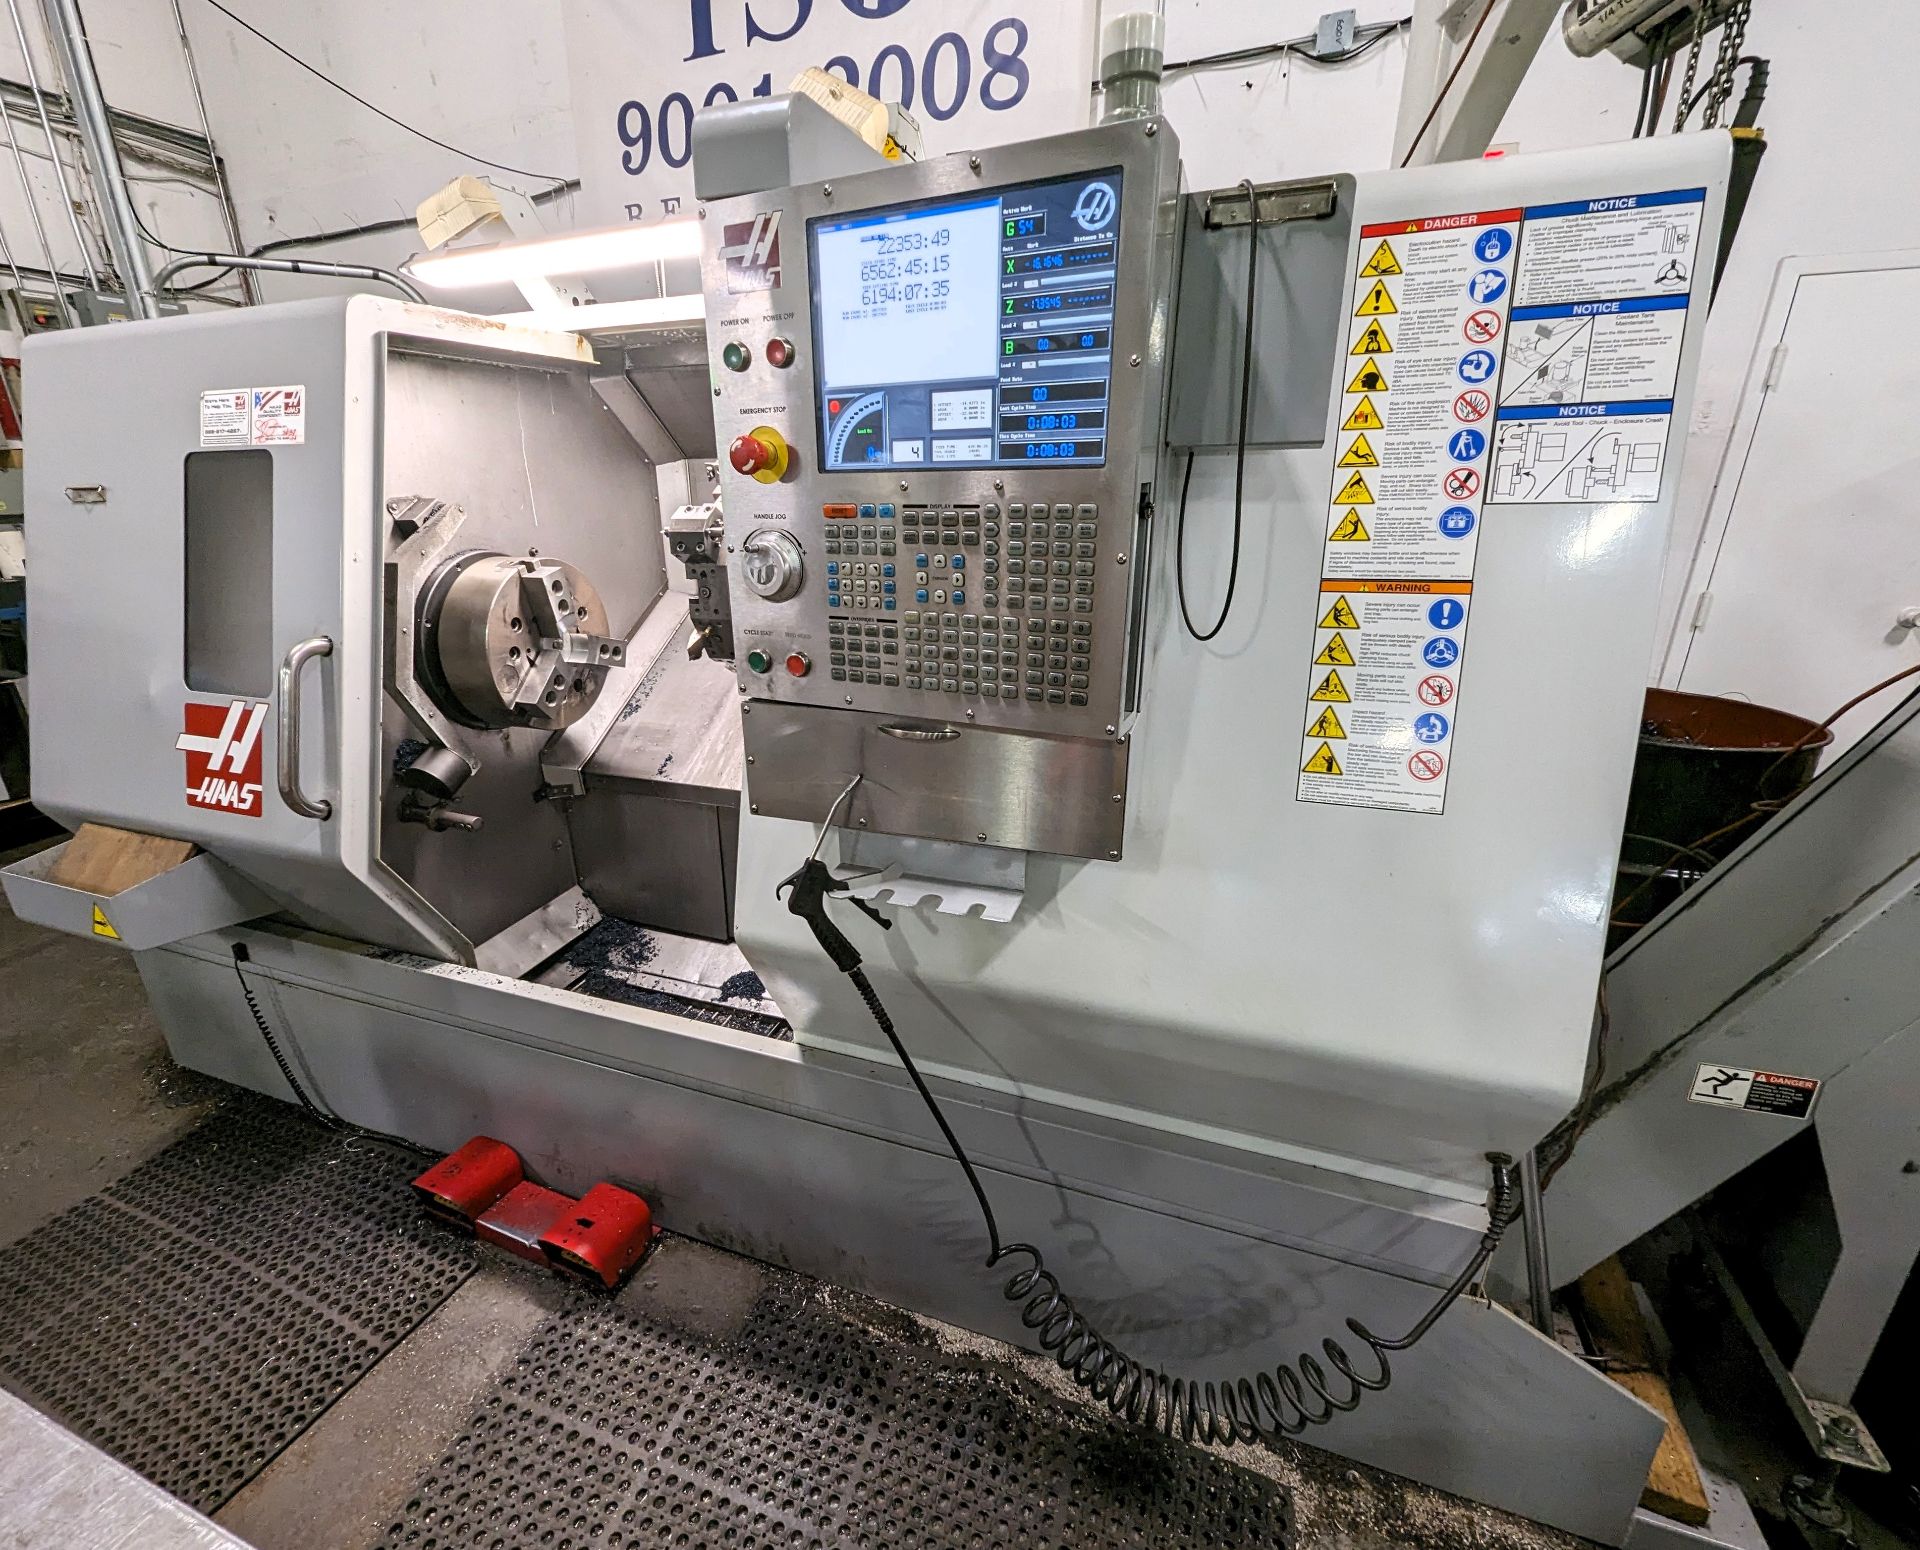 2008 HAAS SL-30TB CNC TURNING CENTER, CNC CONTROL, 15” CHUCK, BIG BORE, TAILSTOCK, TOOL SETTER, CHIP - Image 5 of 13